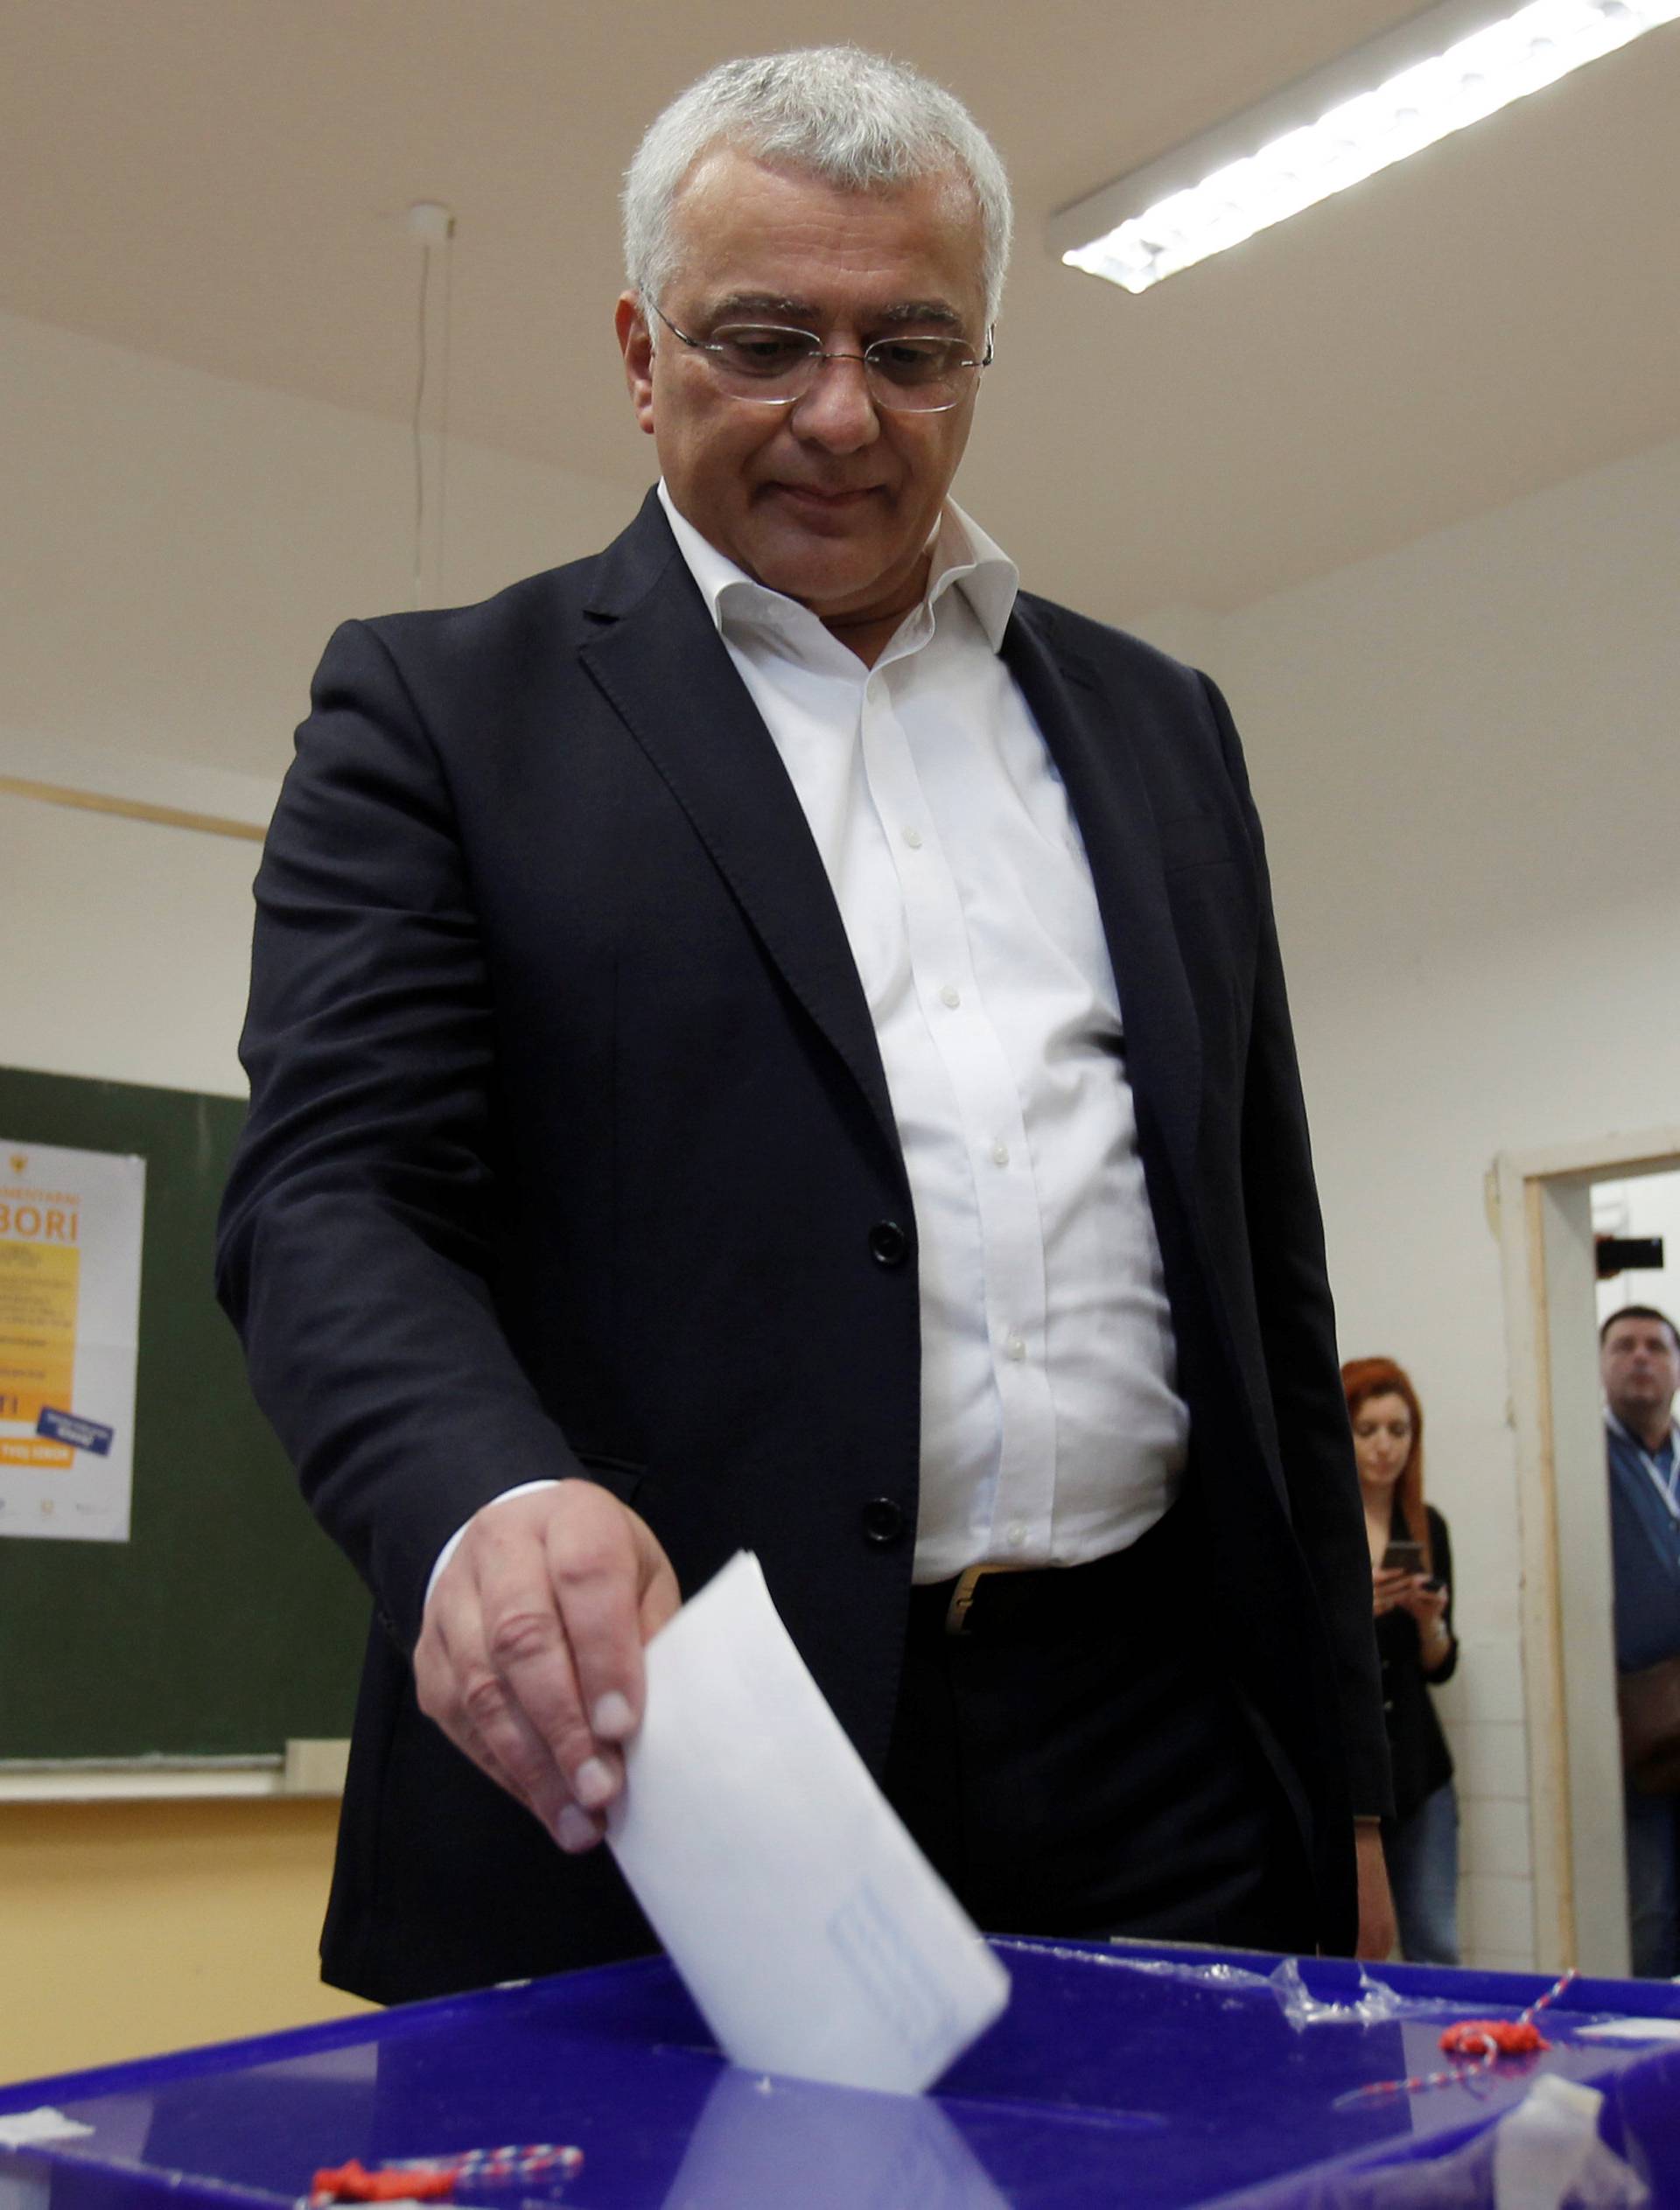 Andrija Mandic, leader of opposition Democratic Front alliance, casts his ballot at a polling station in Podgorica